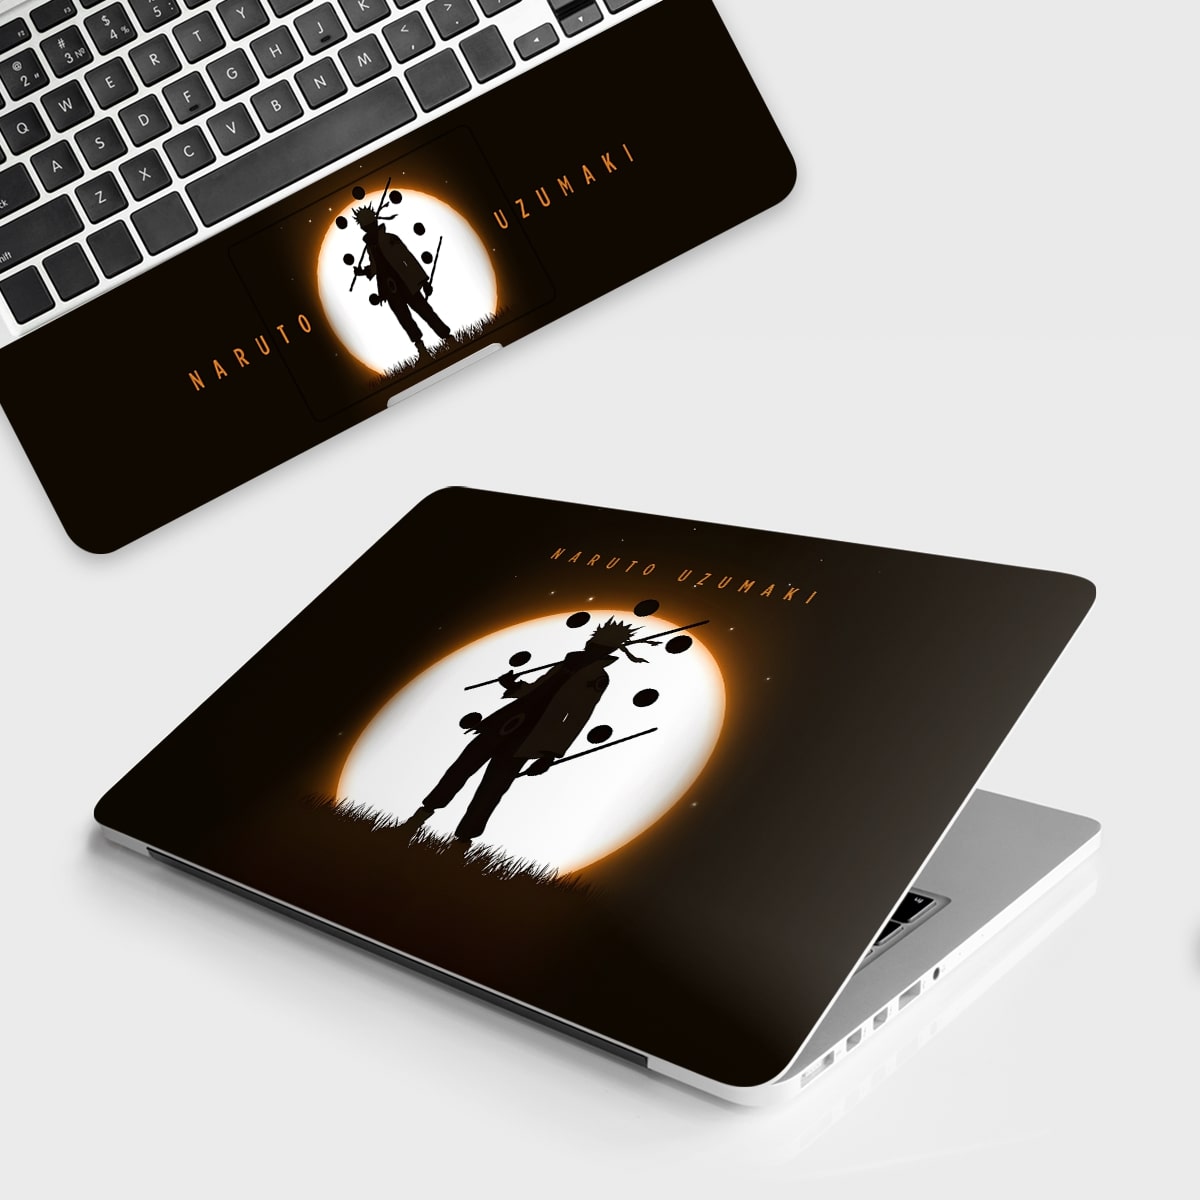 Anime Laptop Skin Featuring Popular Character